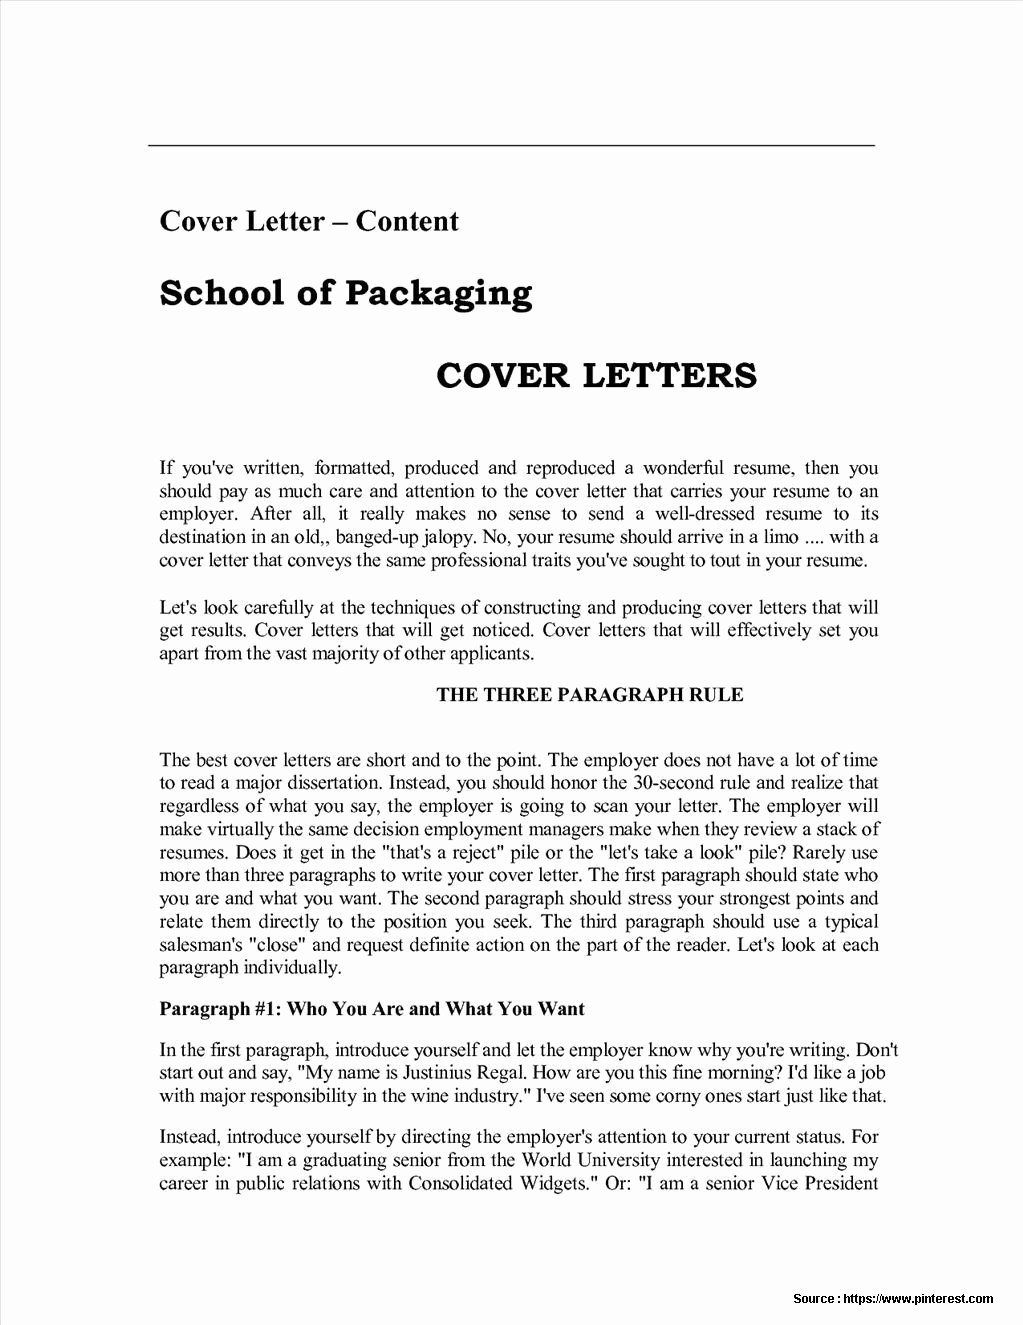 Images Of Resume Cover Letters Inspirational Sample Resume and Cover Letter Pdf Resume Resume